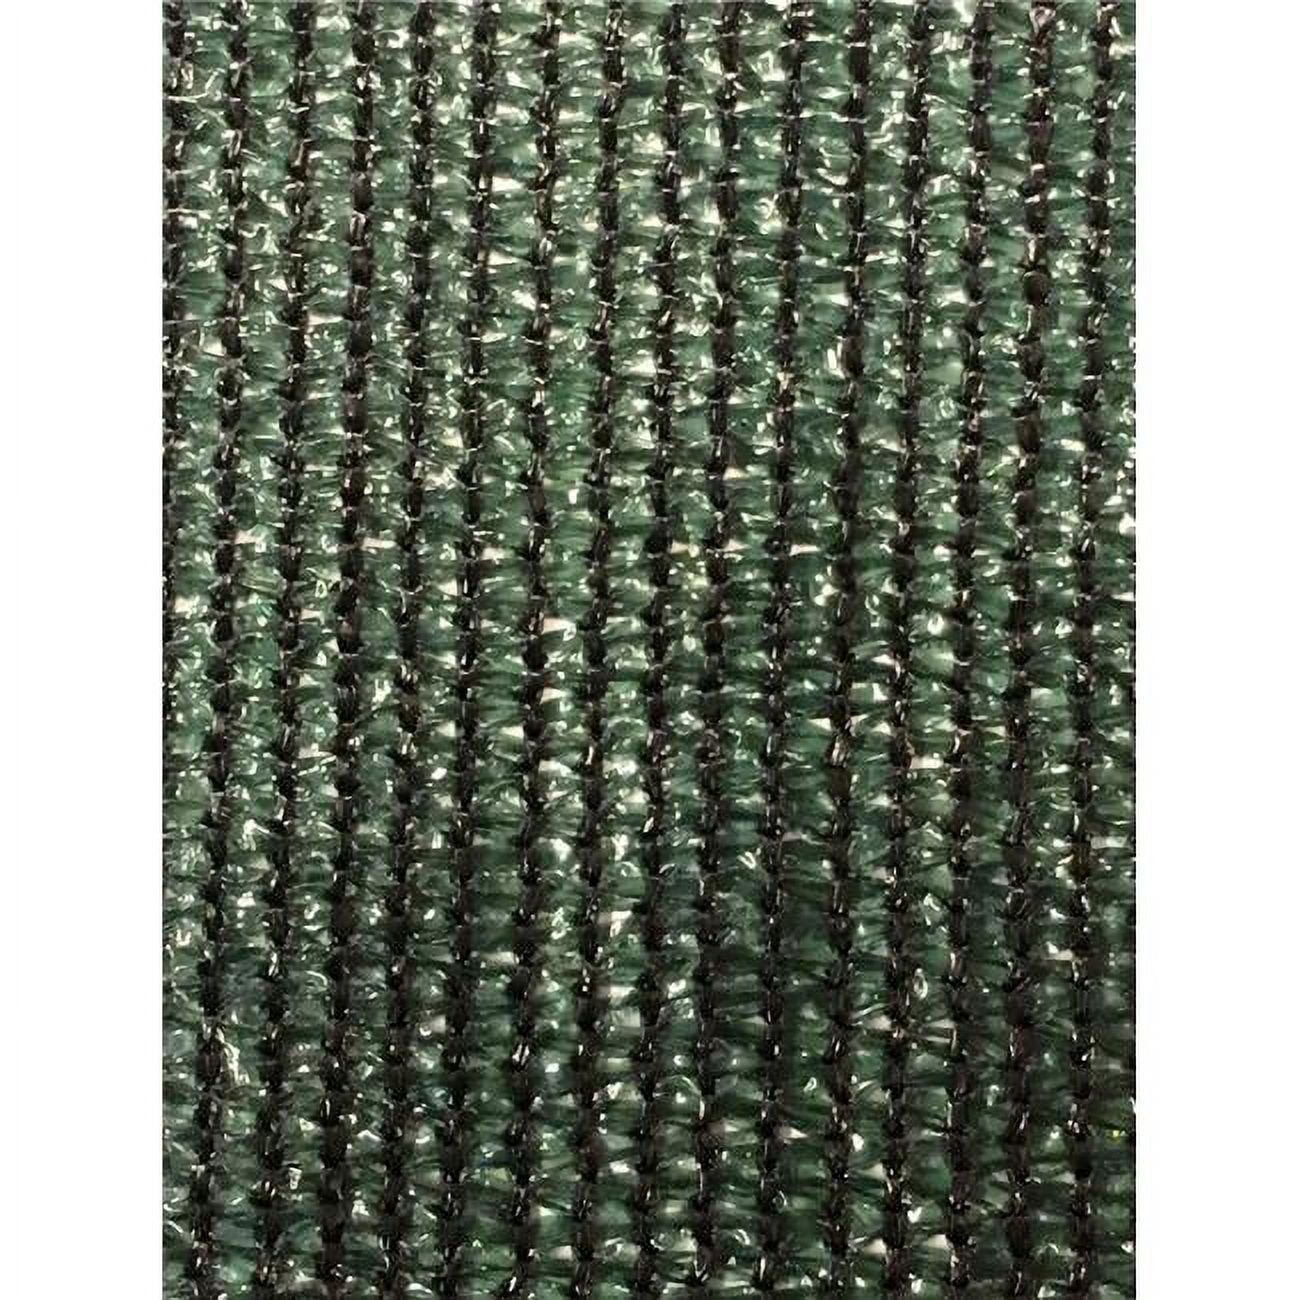 Riverstone Industries PF-630-Green 5.8 x 30 ft. Knitted Privacy Cloth - Green - image 1 of 4